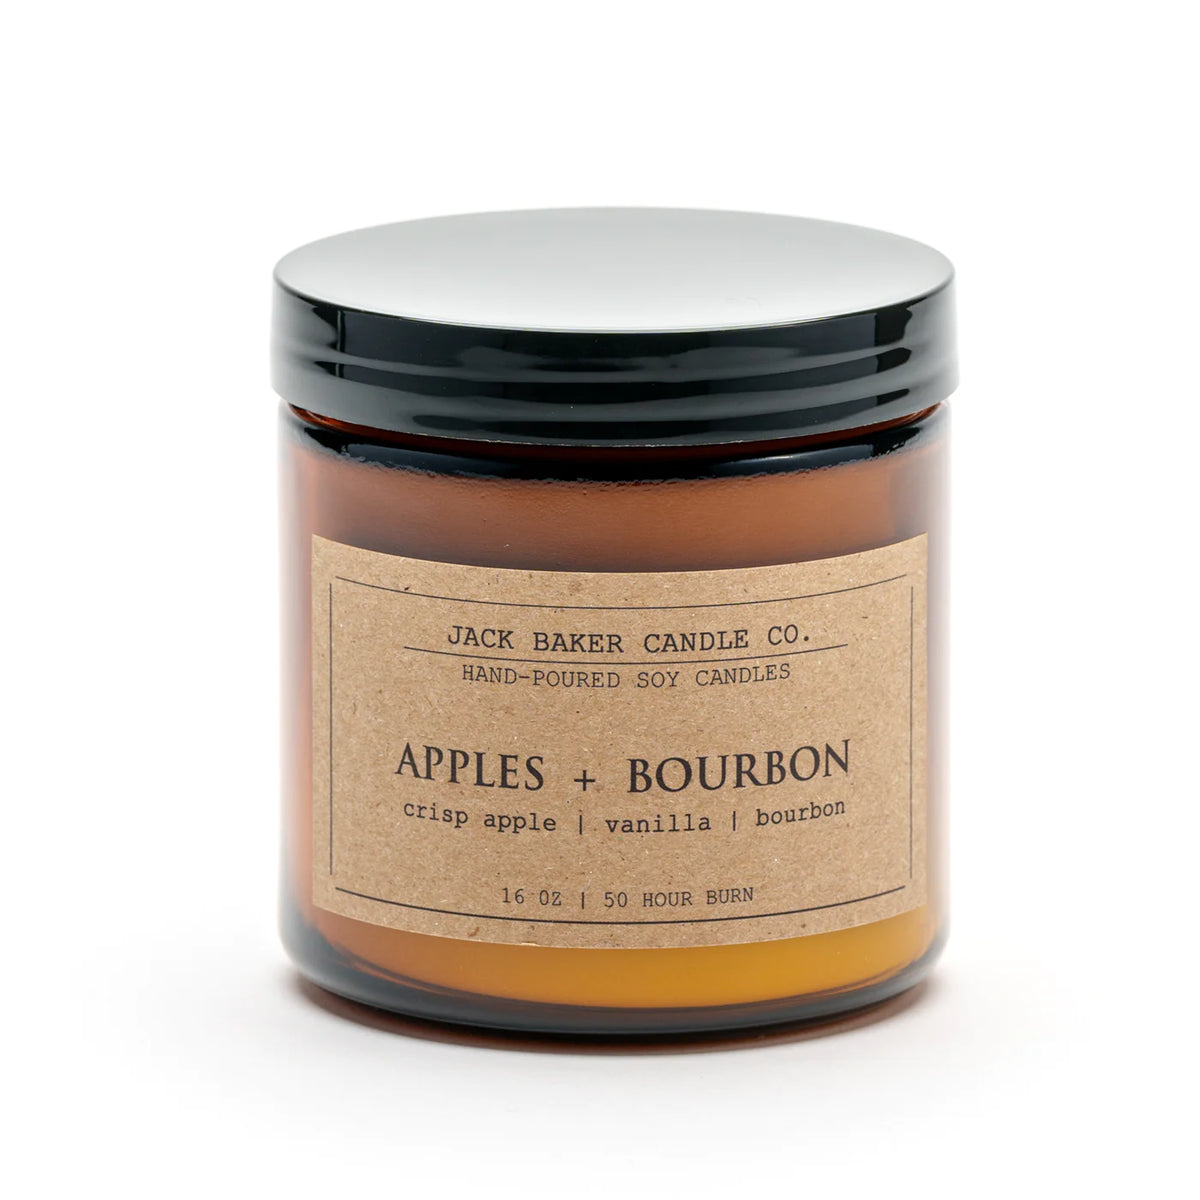 JACK BAKER CANDLE CO: AMBER APOTHECARY COLLECTION